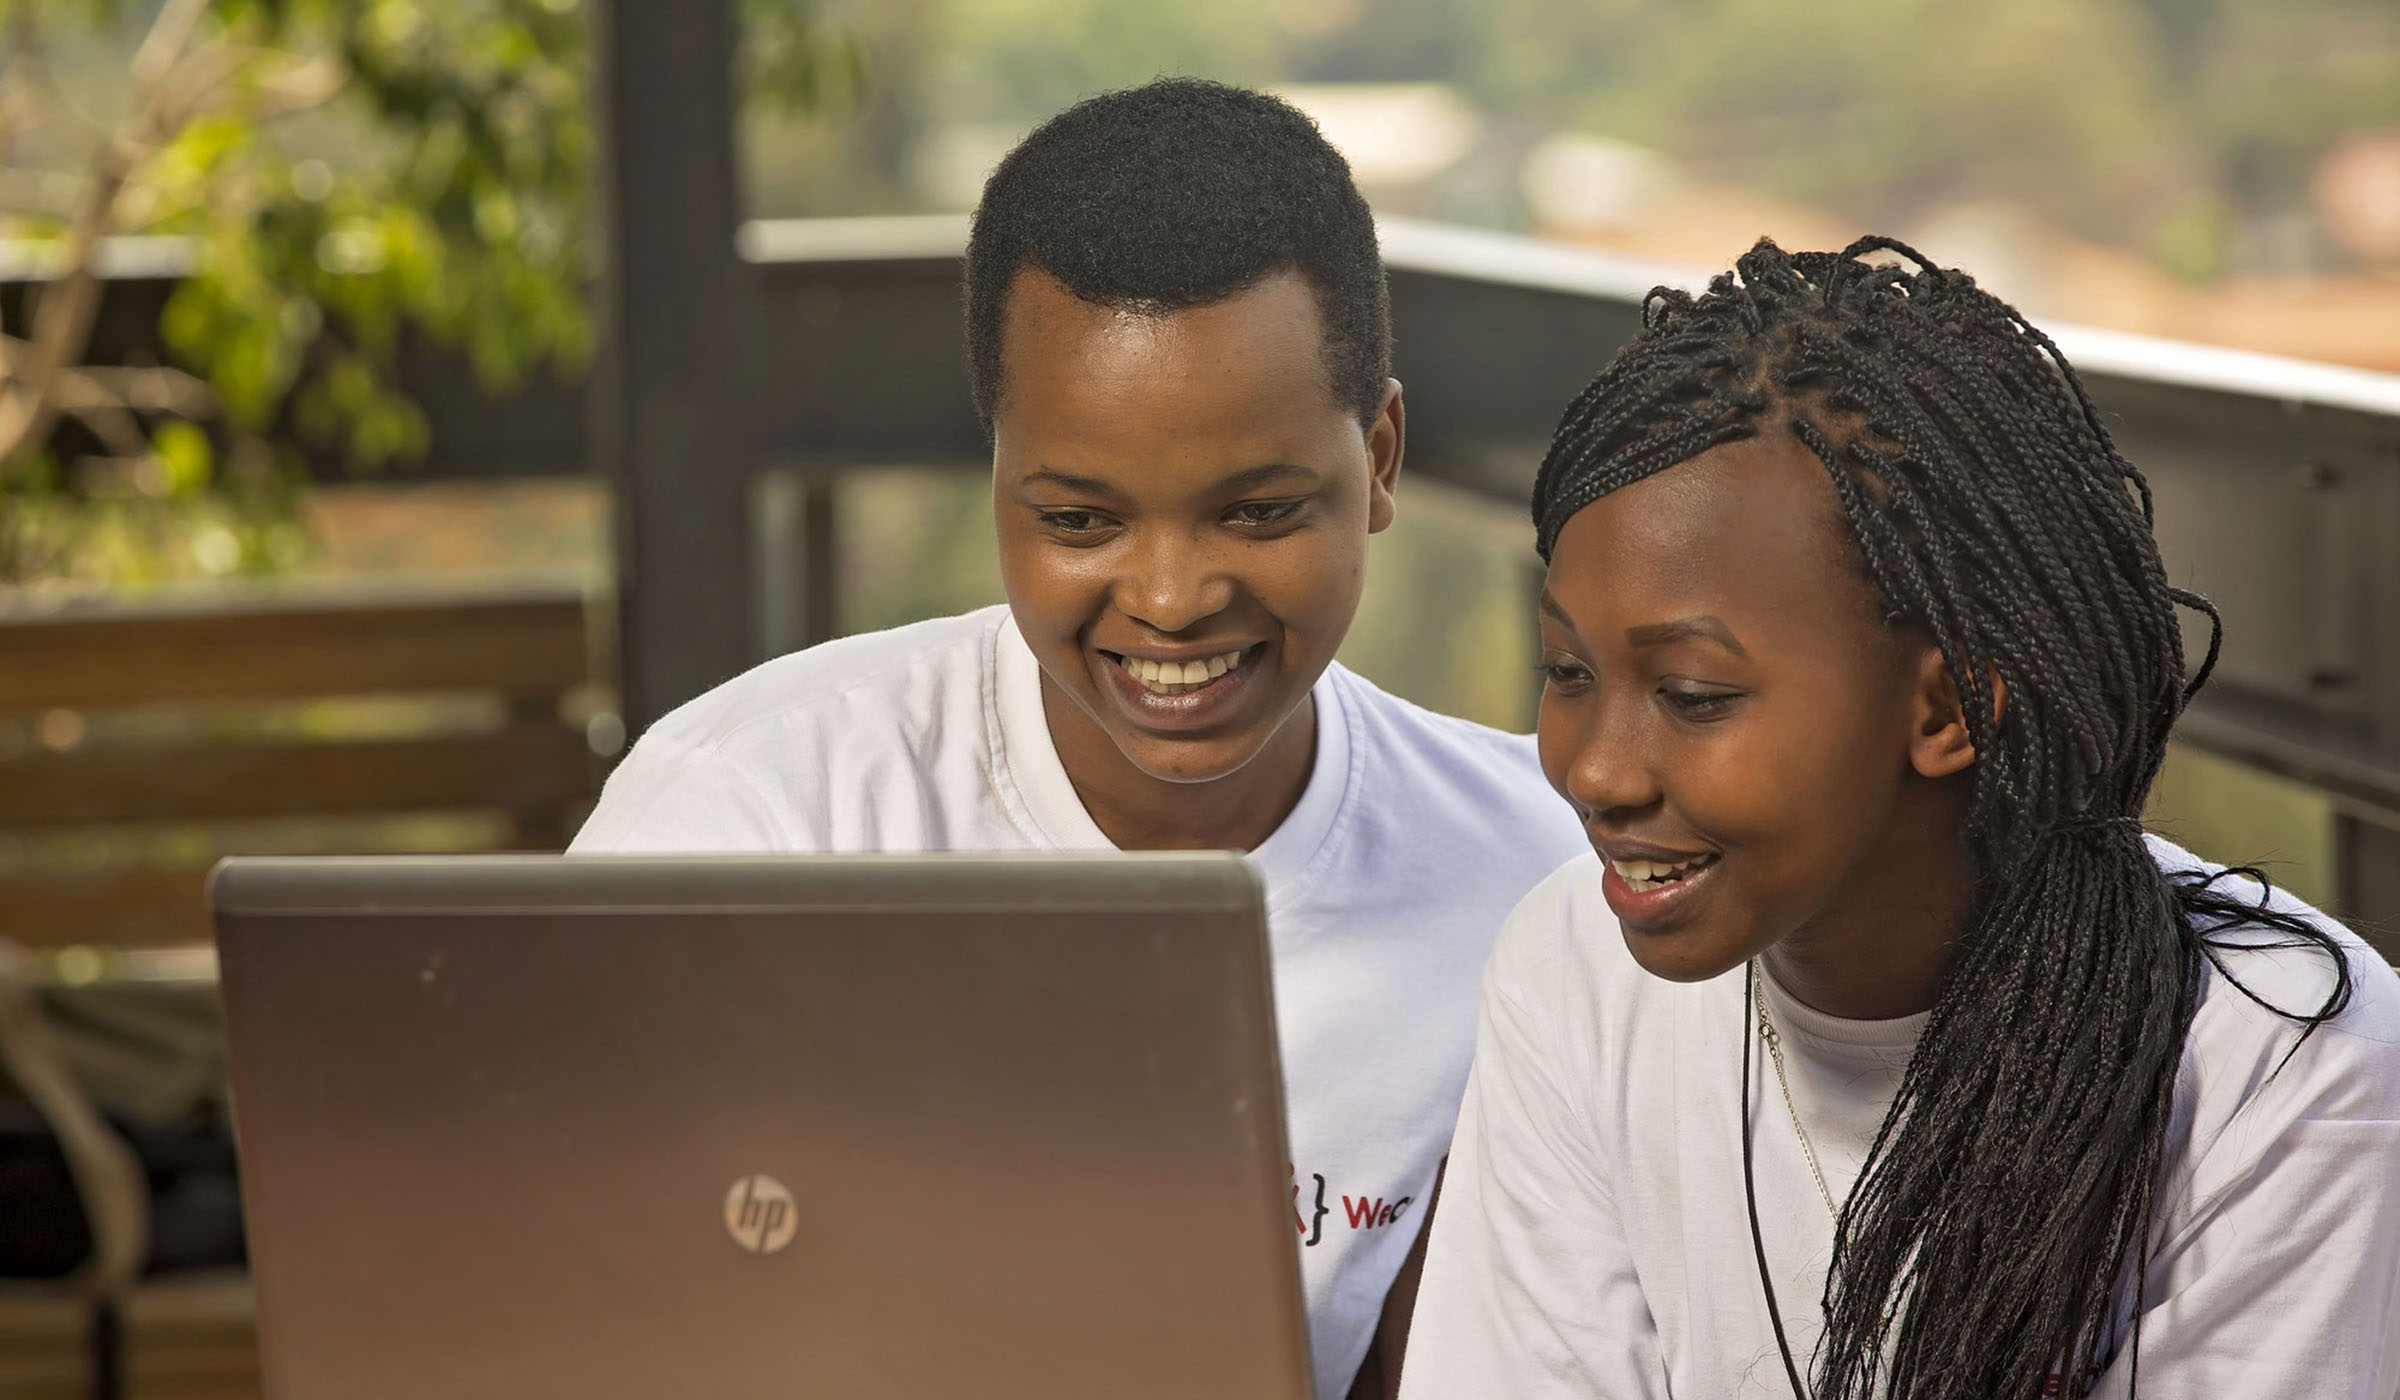 Young women and girls are trained to become professional software testers. 